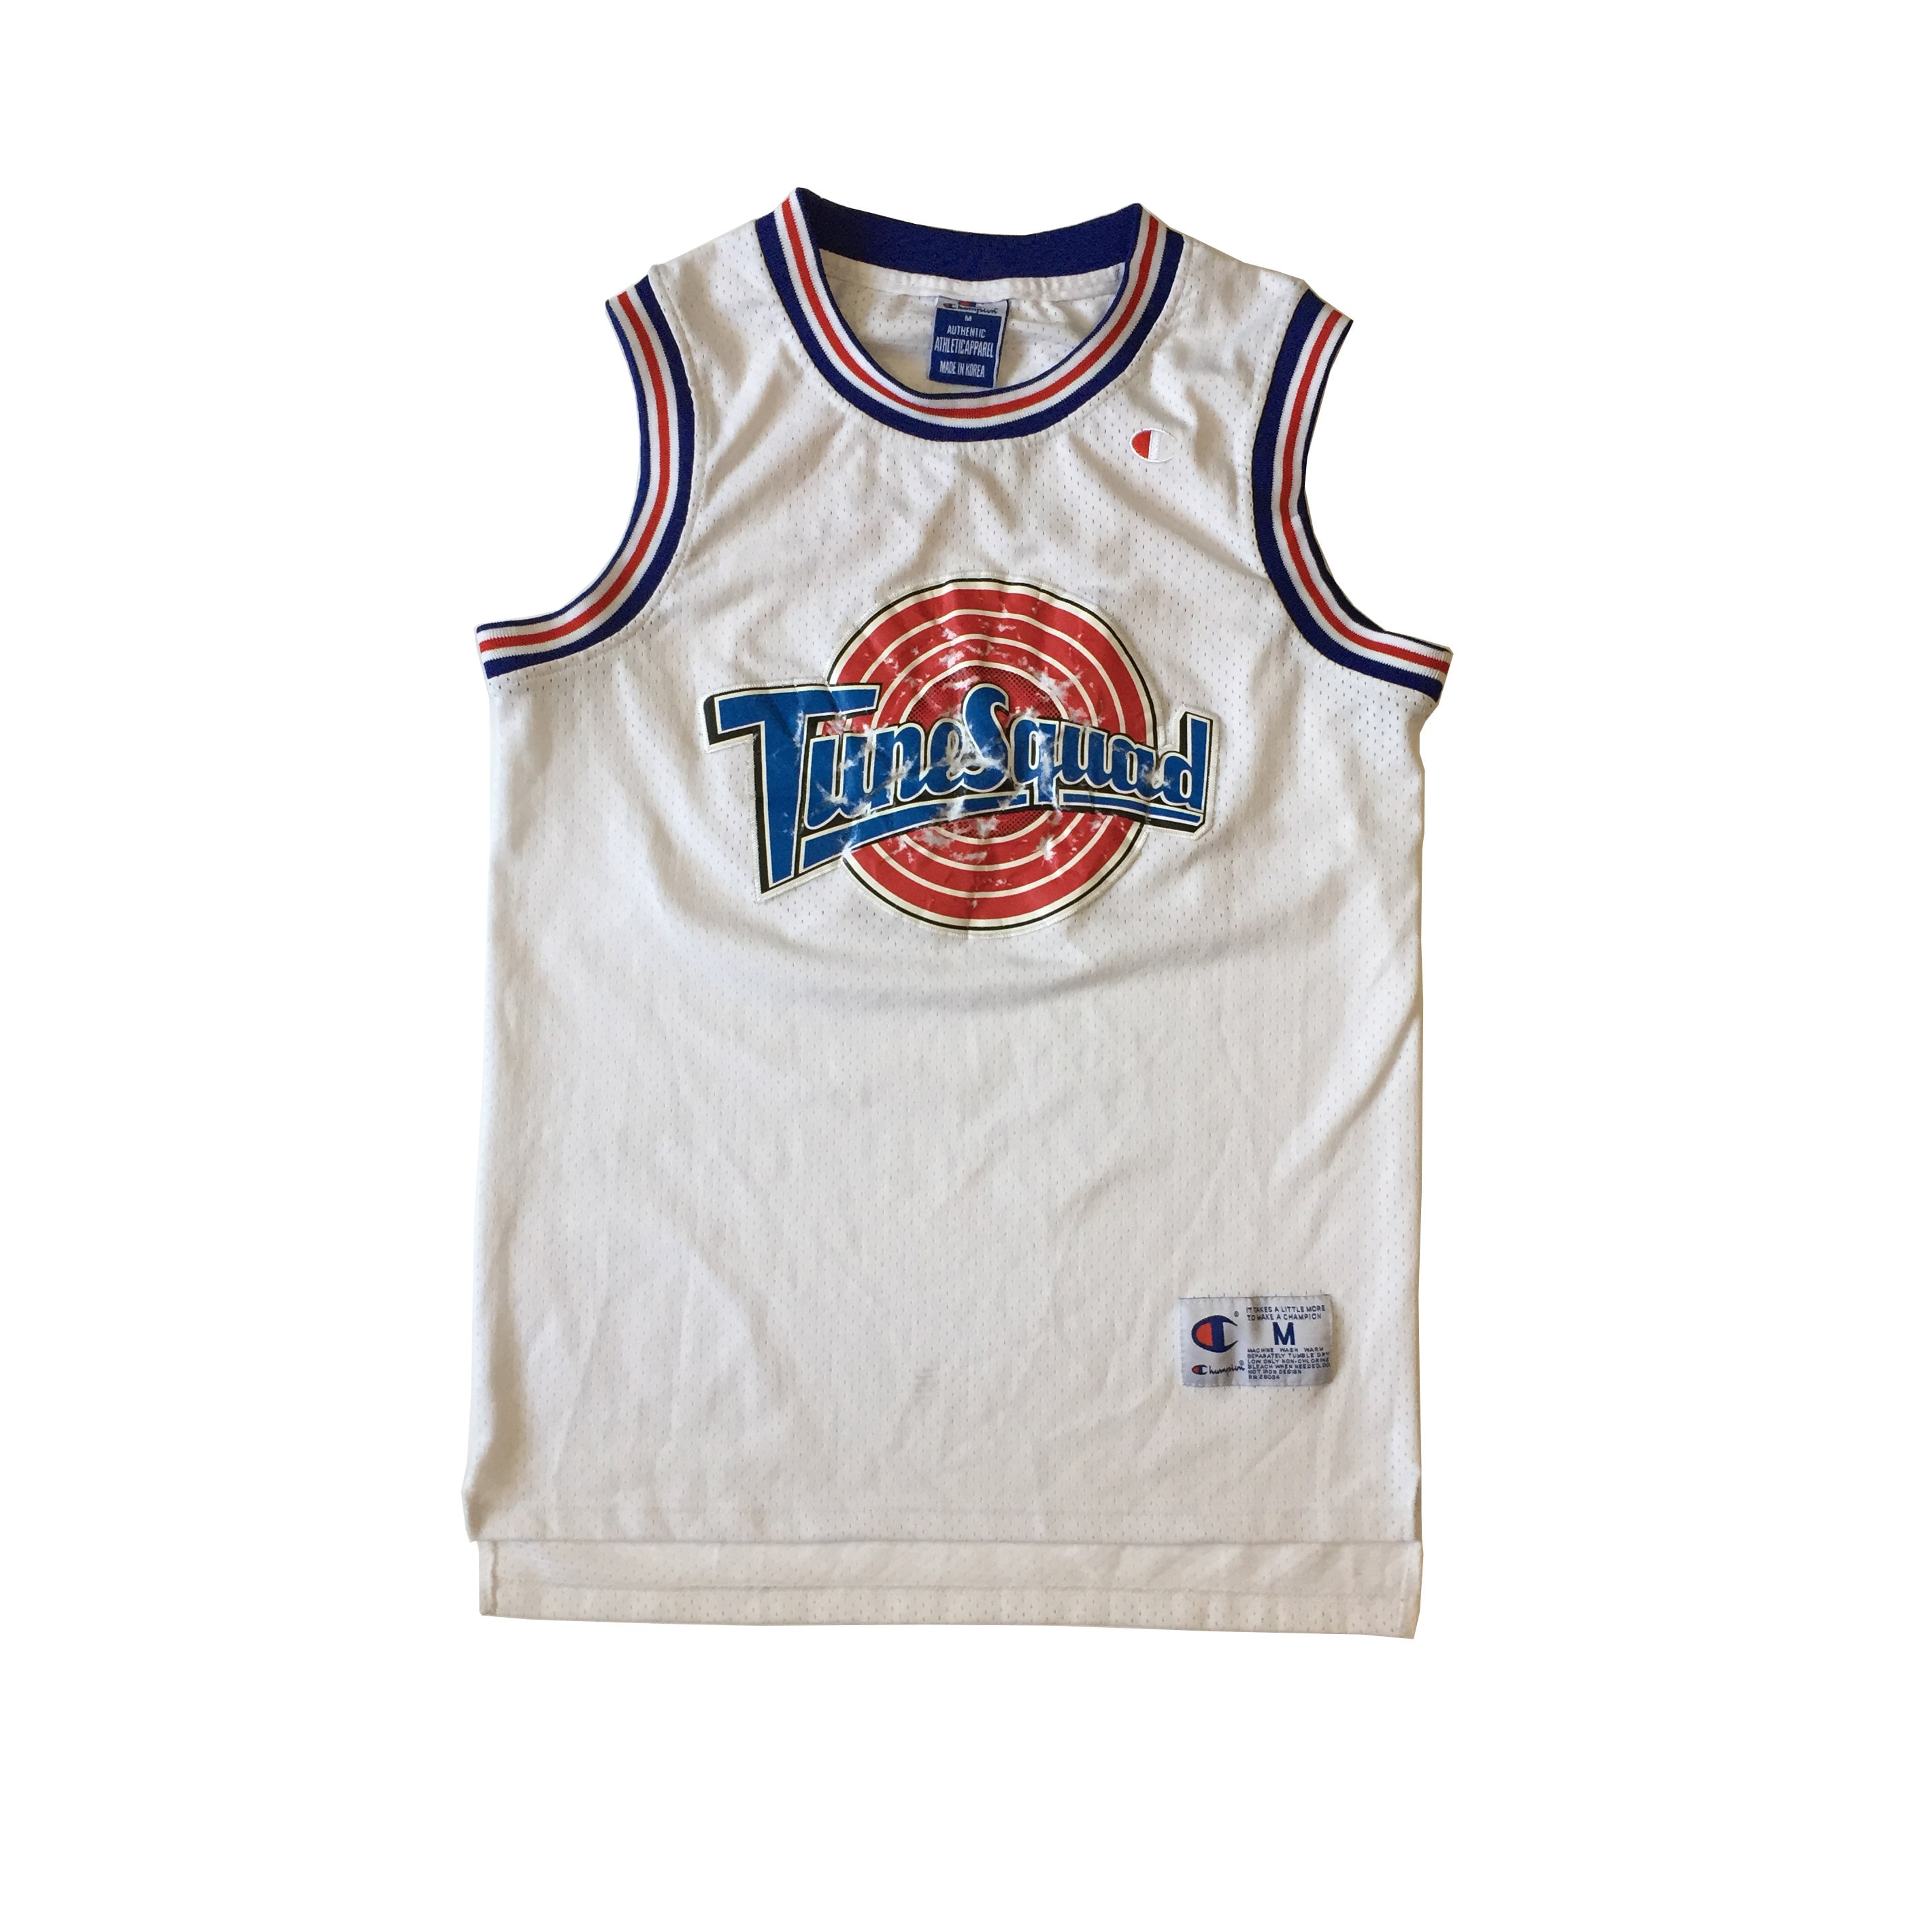 1996 Sylvester Tune Squad Space Jam Champion Jersey Size 44